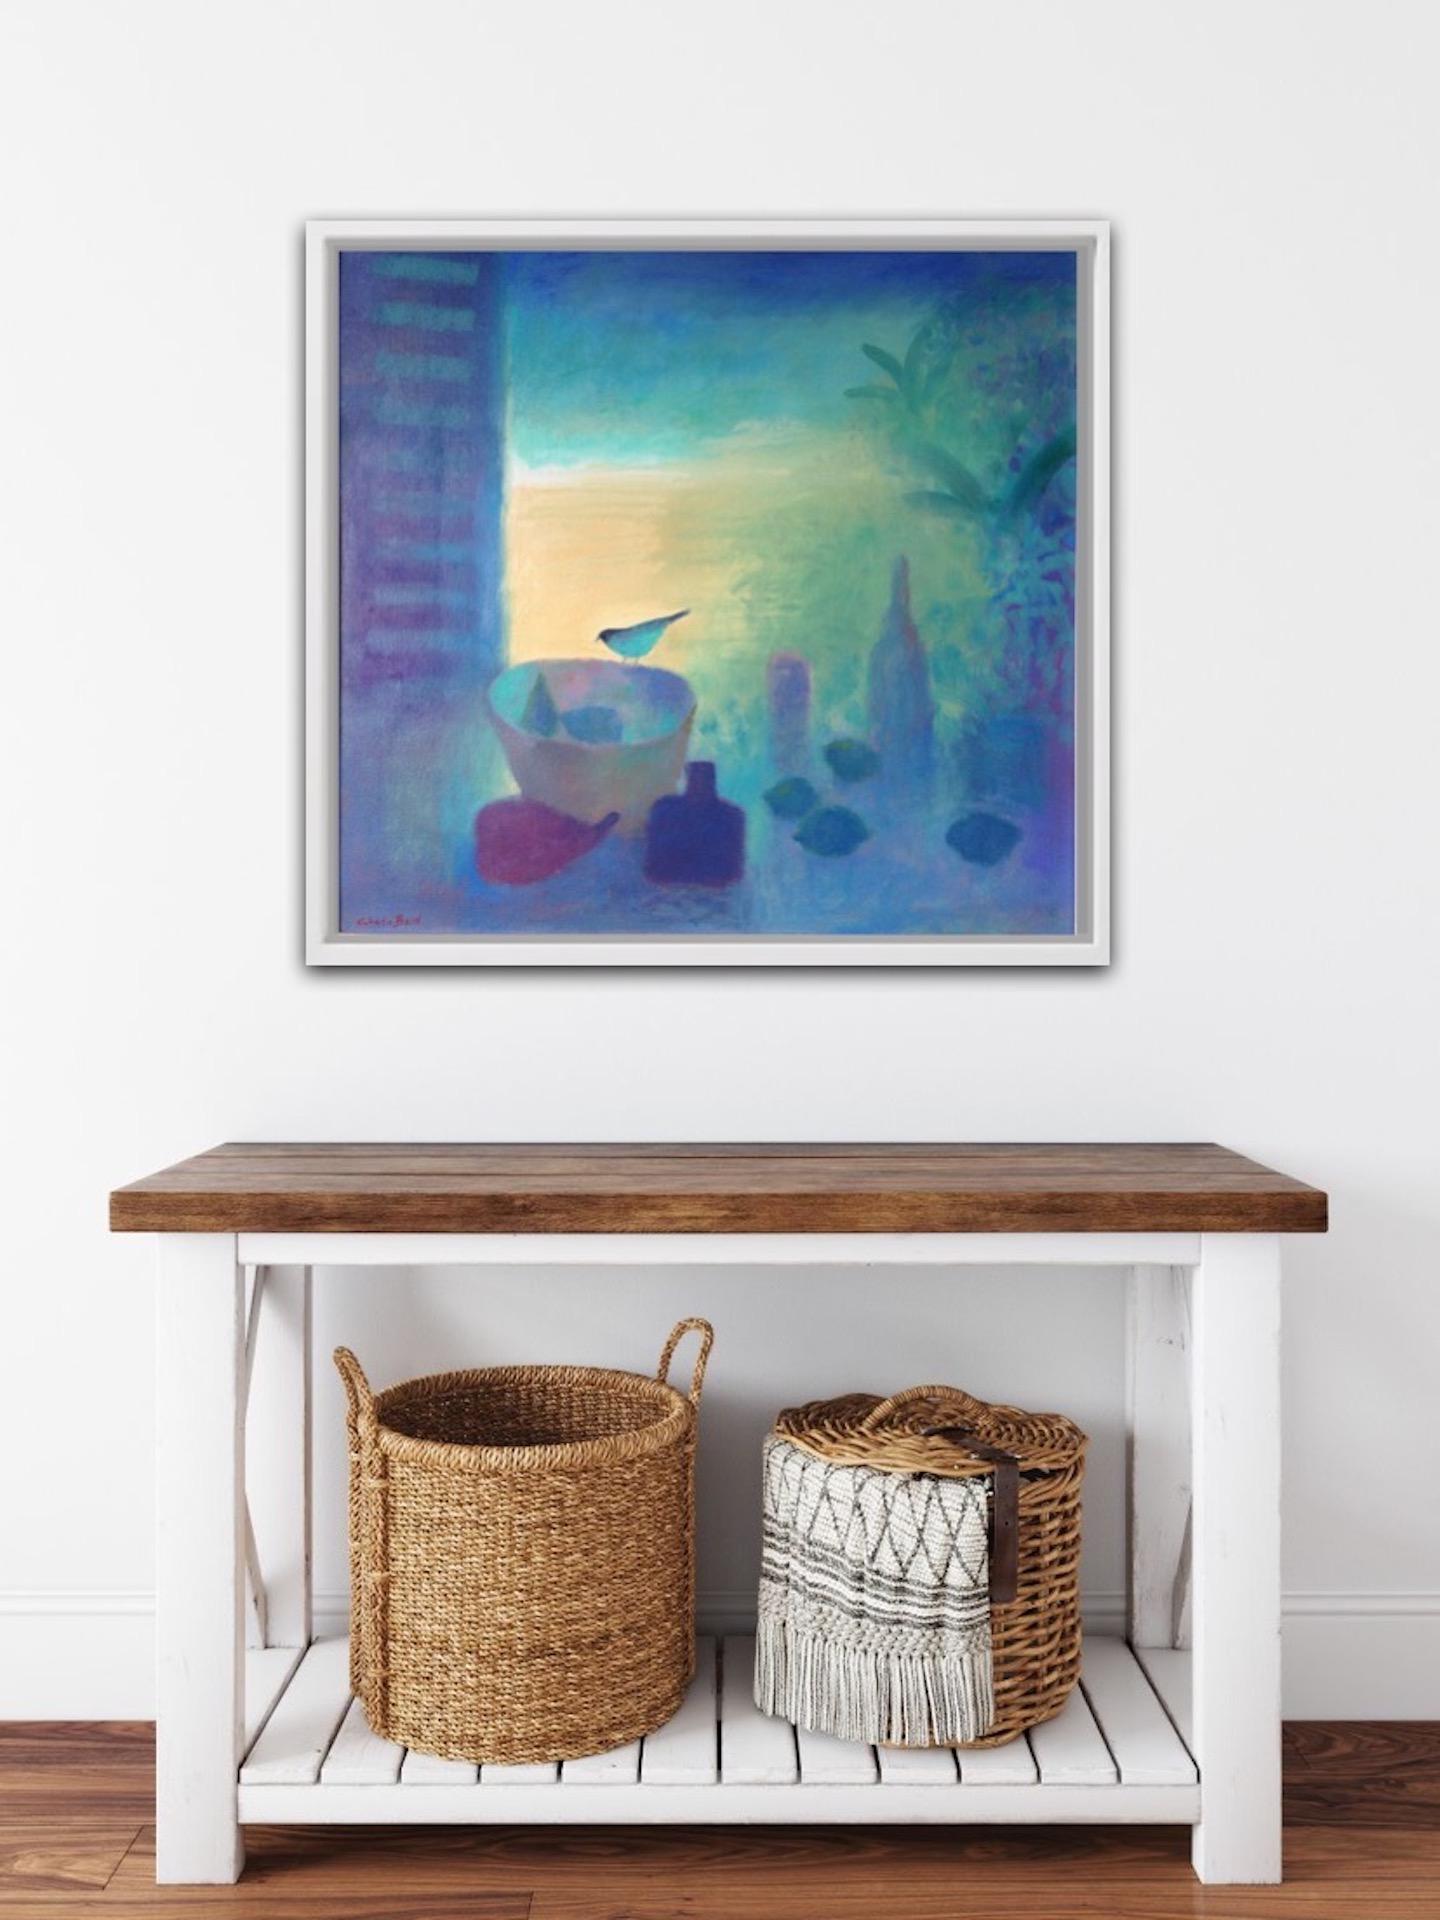 Charlie Baird
Still Life with Bird and Fruit
Original Still Life Painting
Oil Paint on Canvas
Framed Size: H 62cm x W 67cm
Sold Unframmed
Please note that insitu images are purely an indication of how a piece may look.

Still Life with Bird and